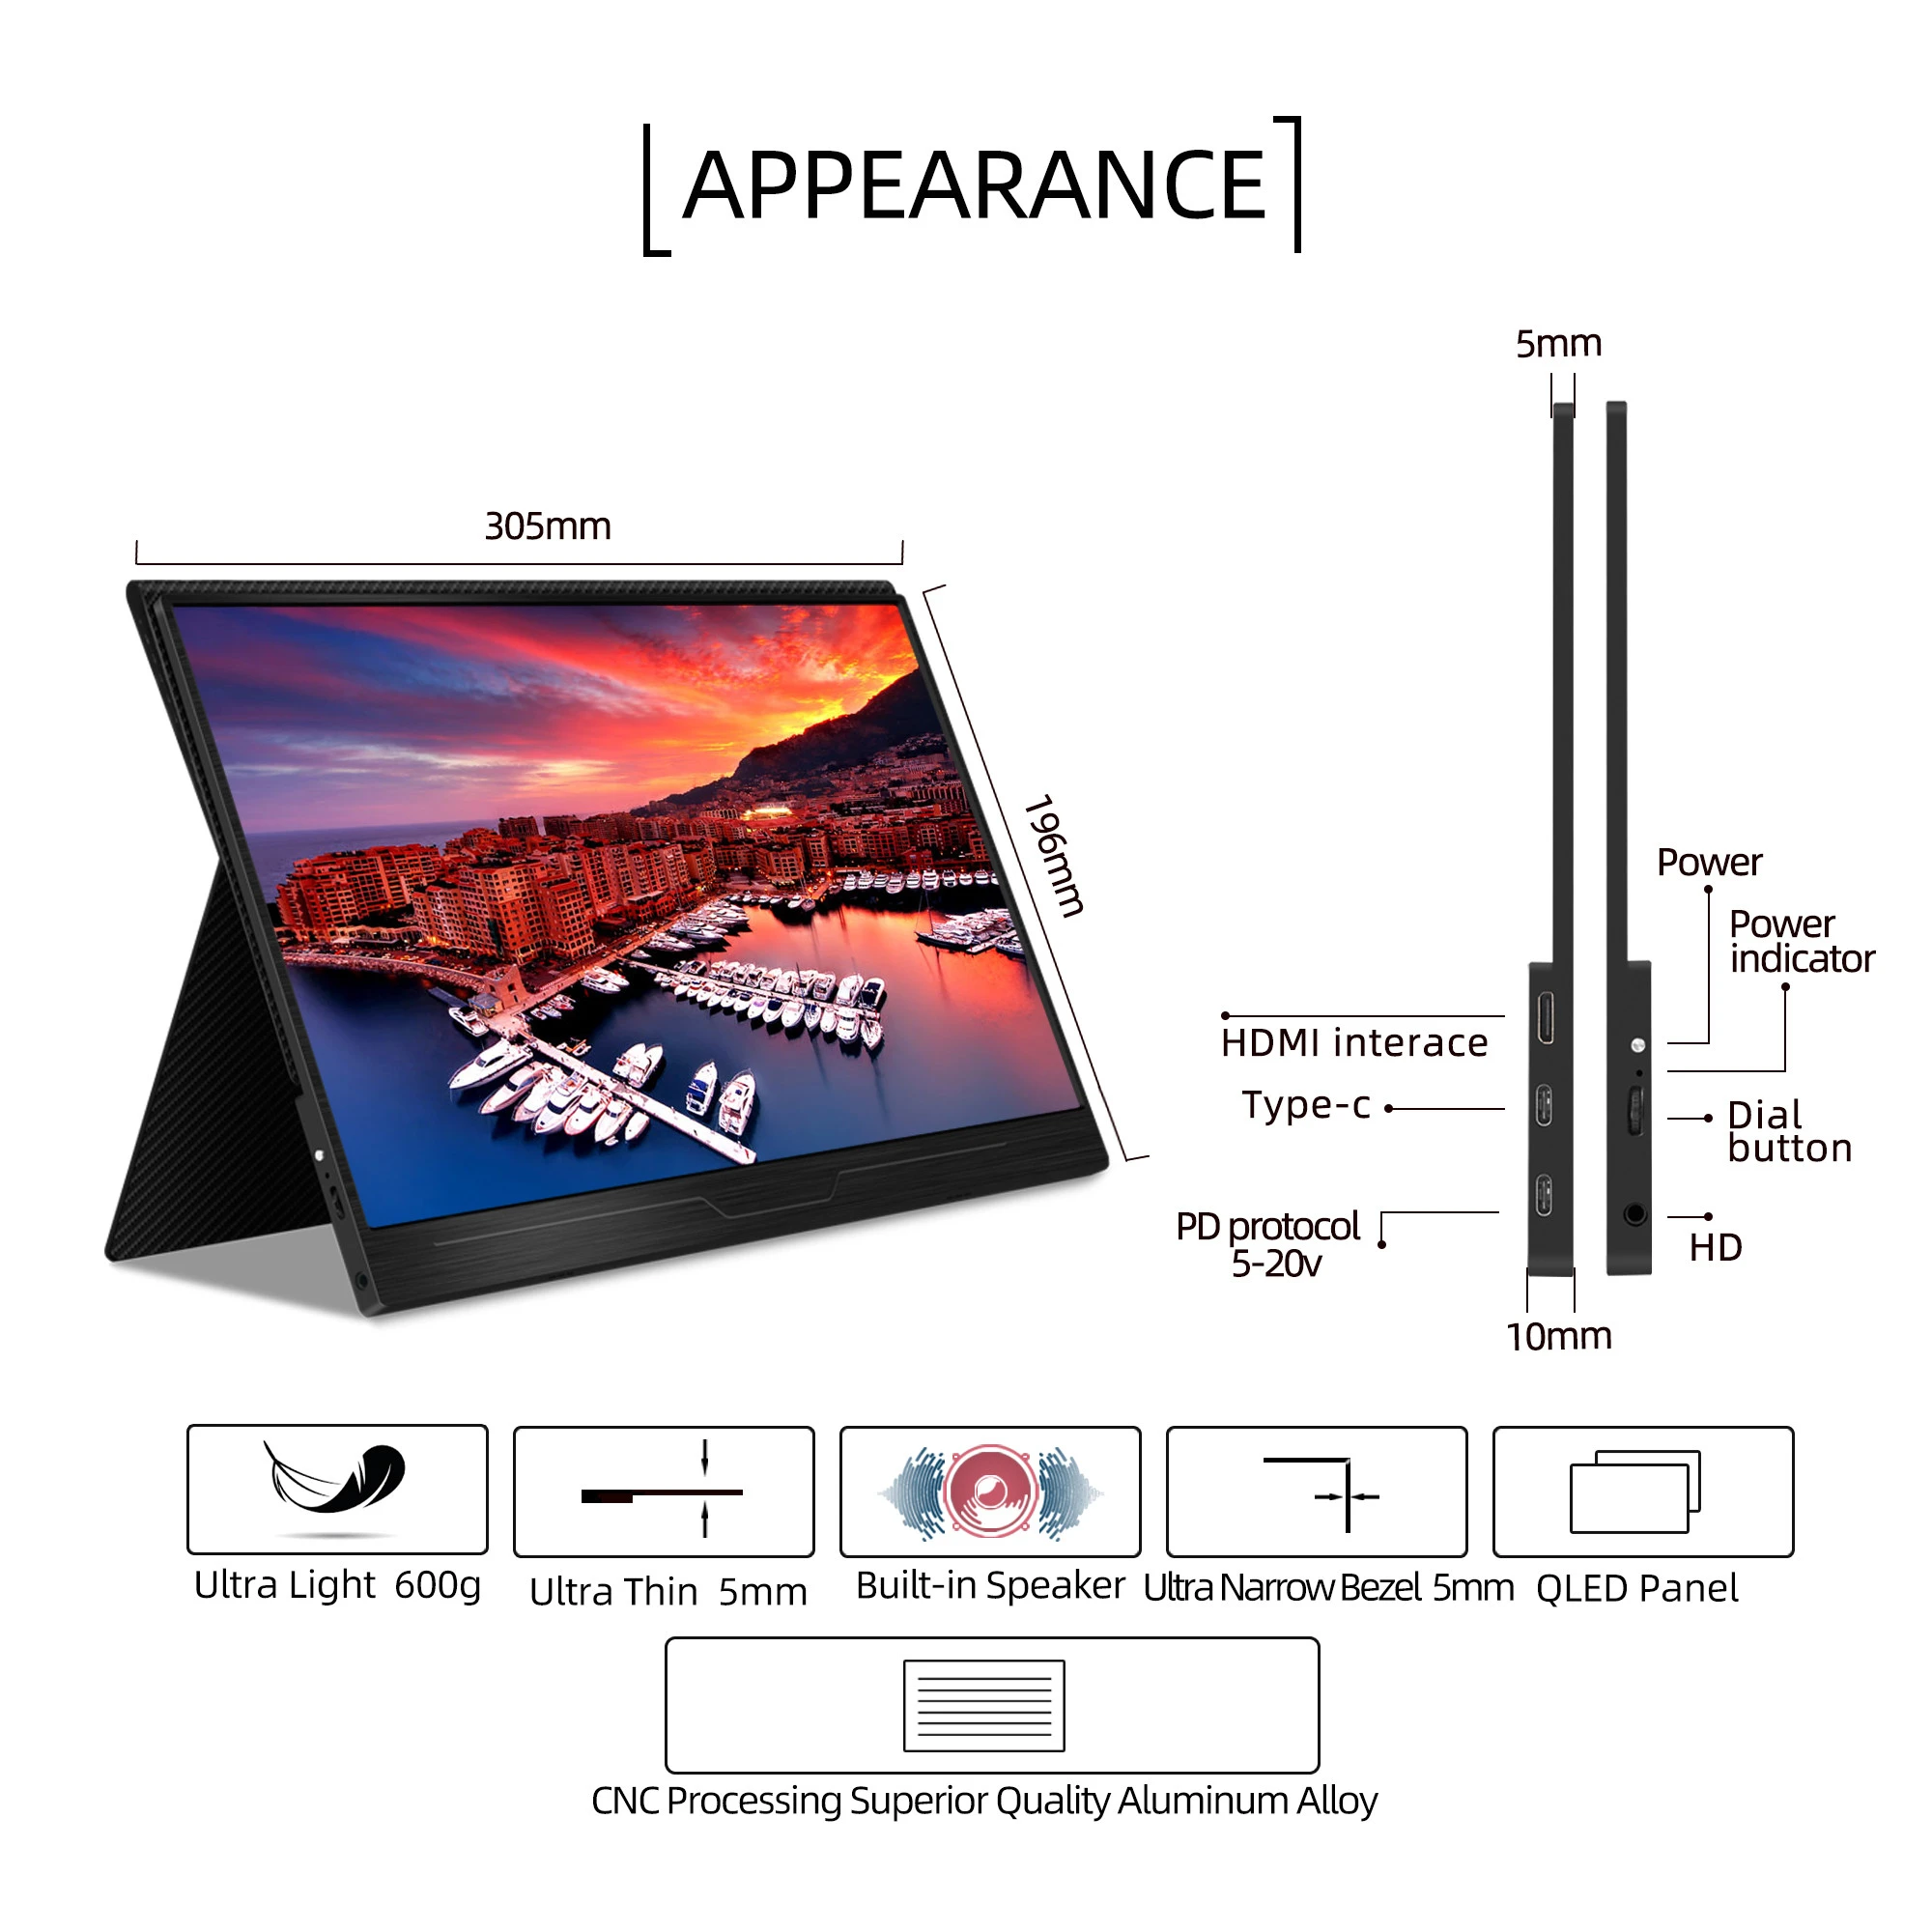 Portable Monitor 1080P 13.3 inch USB C  LCD Computer Display by Intehill